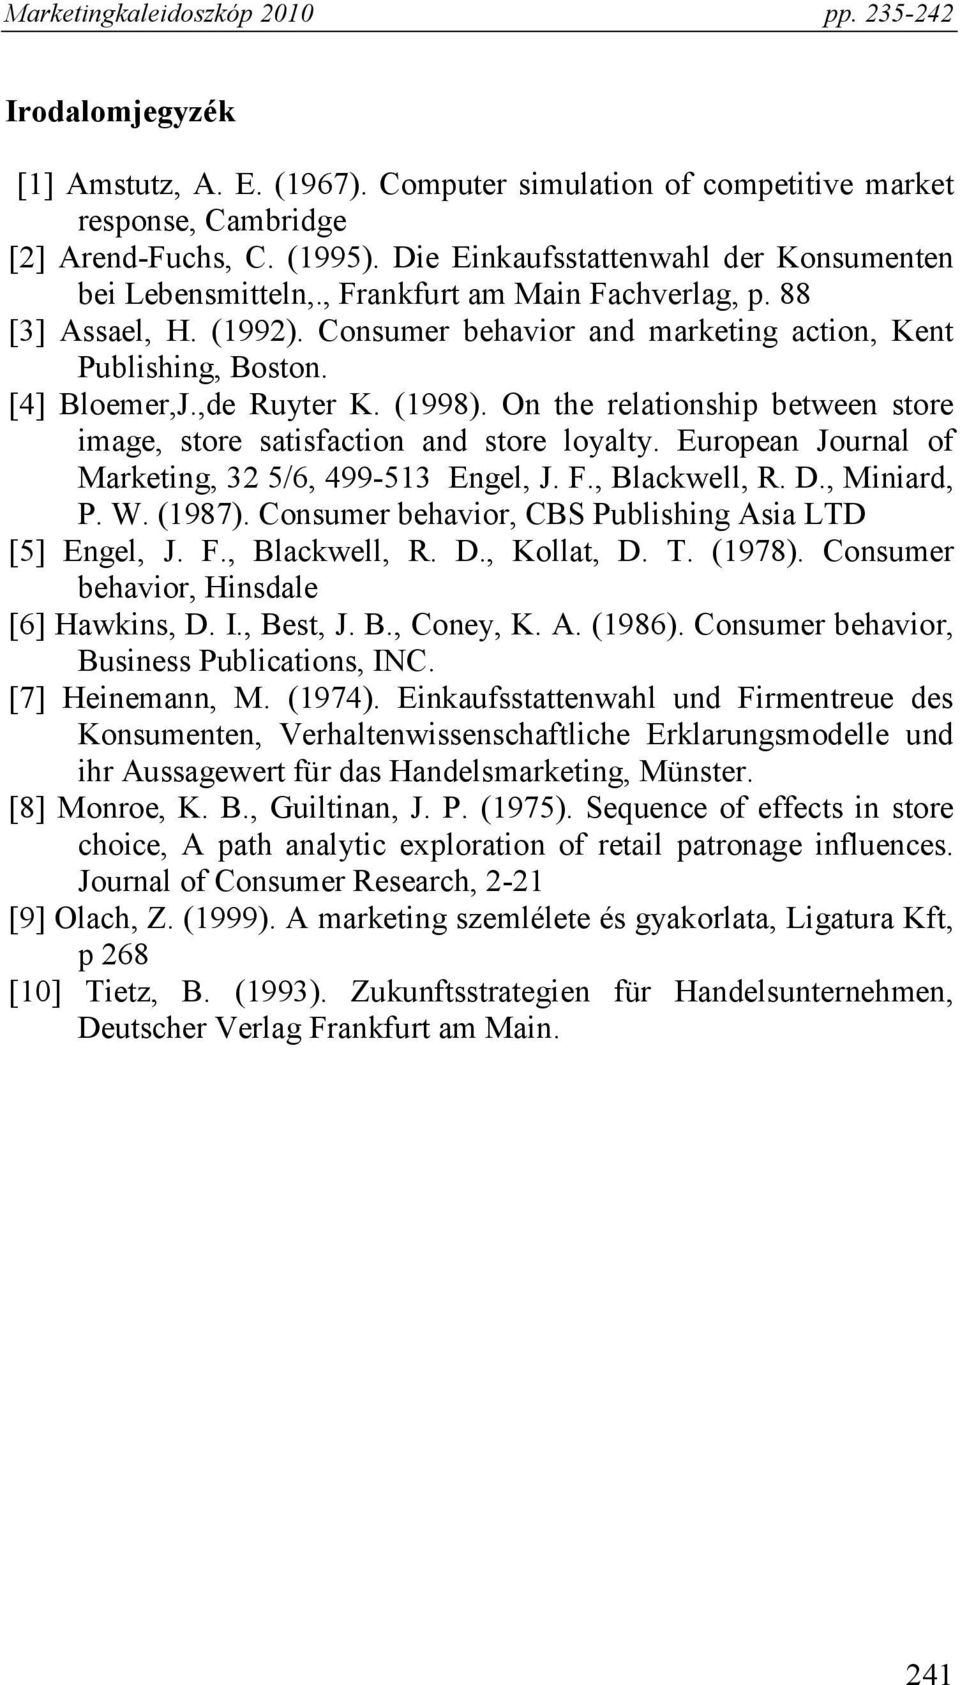 On the relationship between store image, store satisfaction and store loyalty. European Journal of Marketing, 32 5/6, 499-513 Engel, J. F., Blackwell, R. D., Miniard, P. W. (1987).